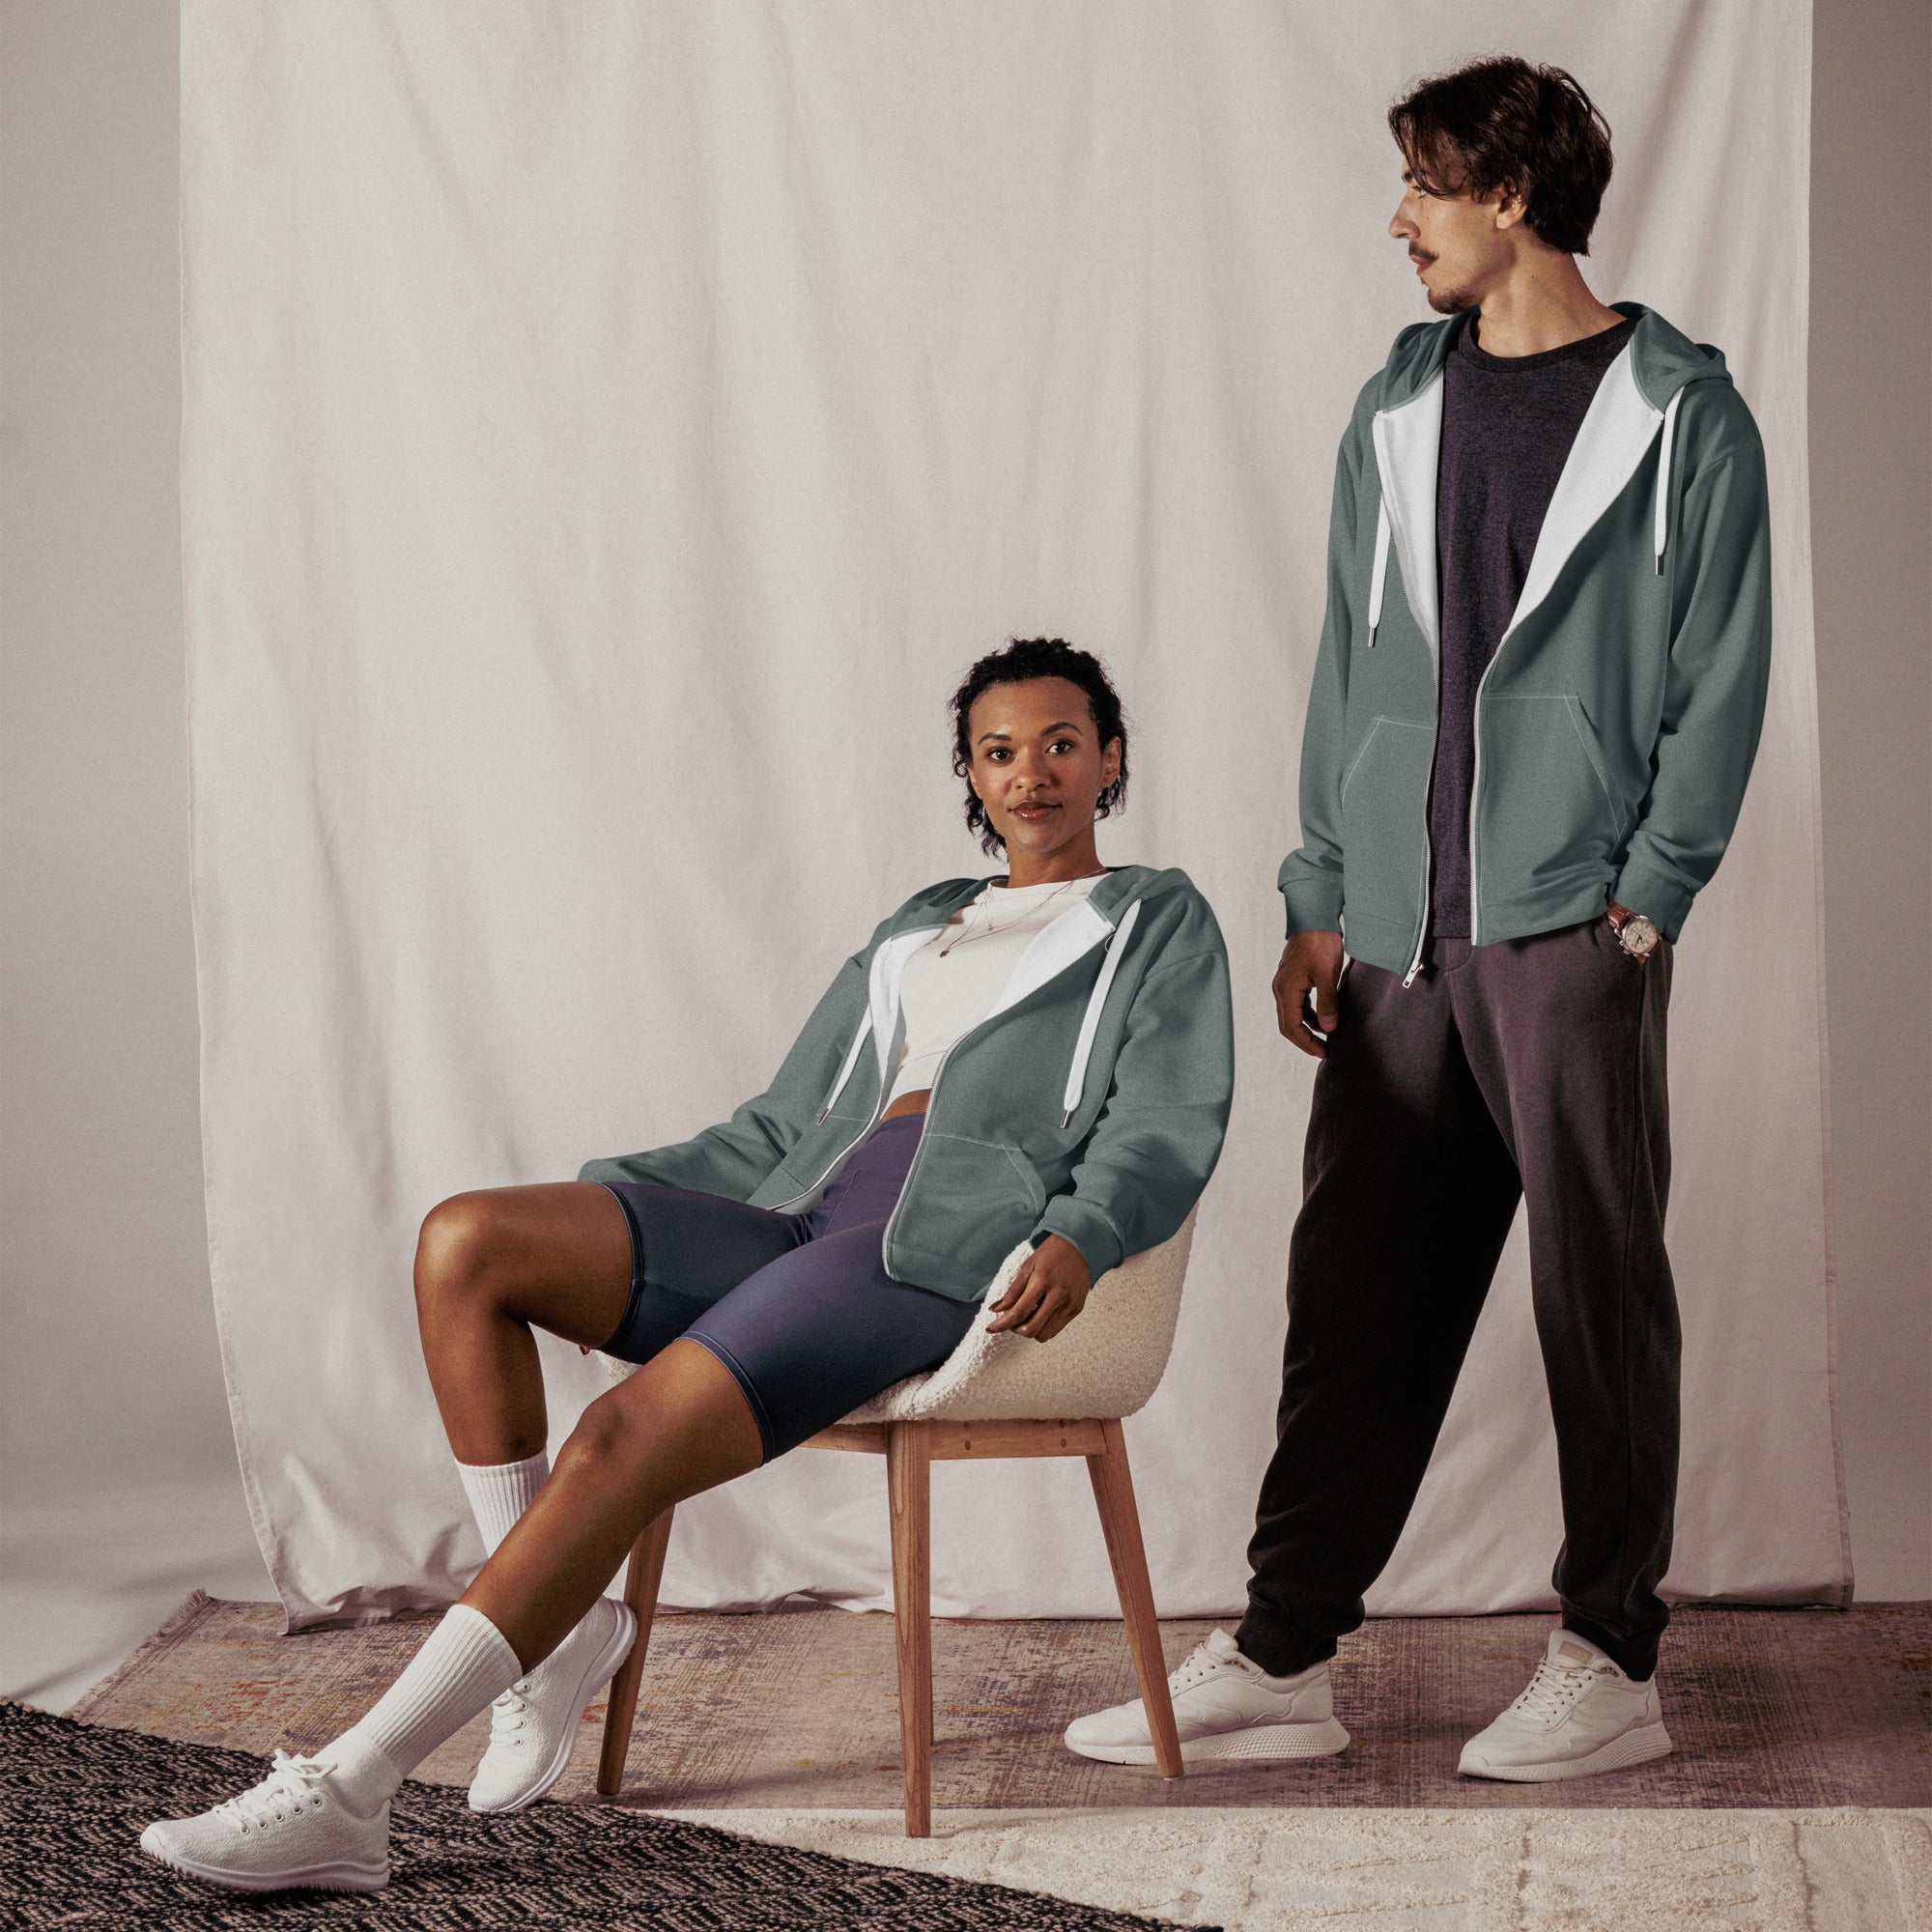 Mireille Fine Art, Humble Sportswear, Men and Women's Color Match loungewear collection image